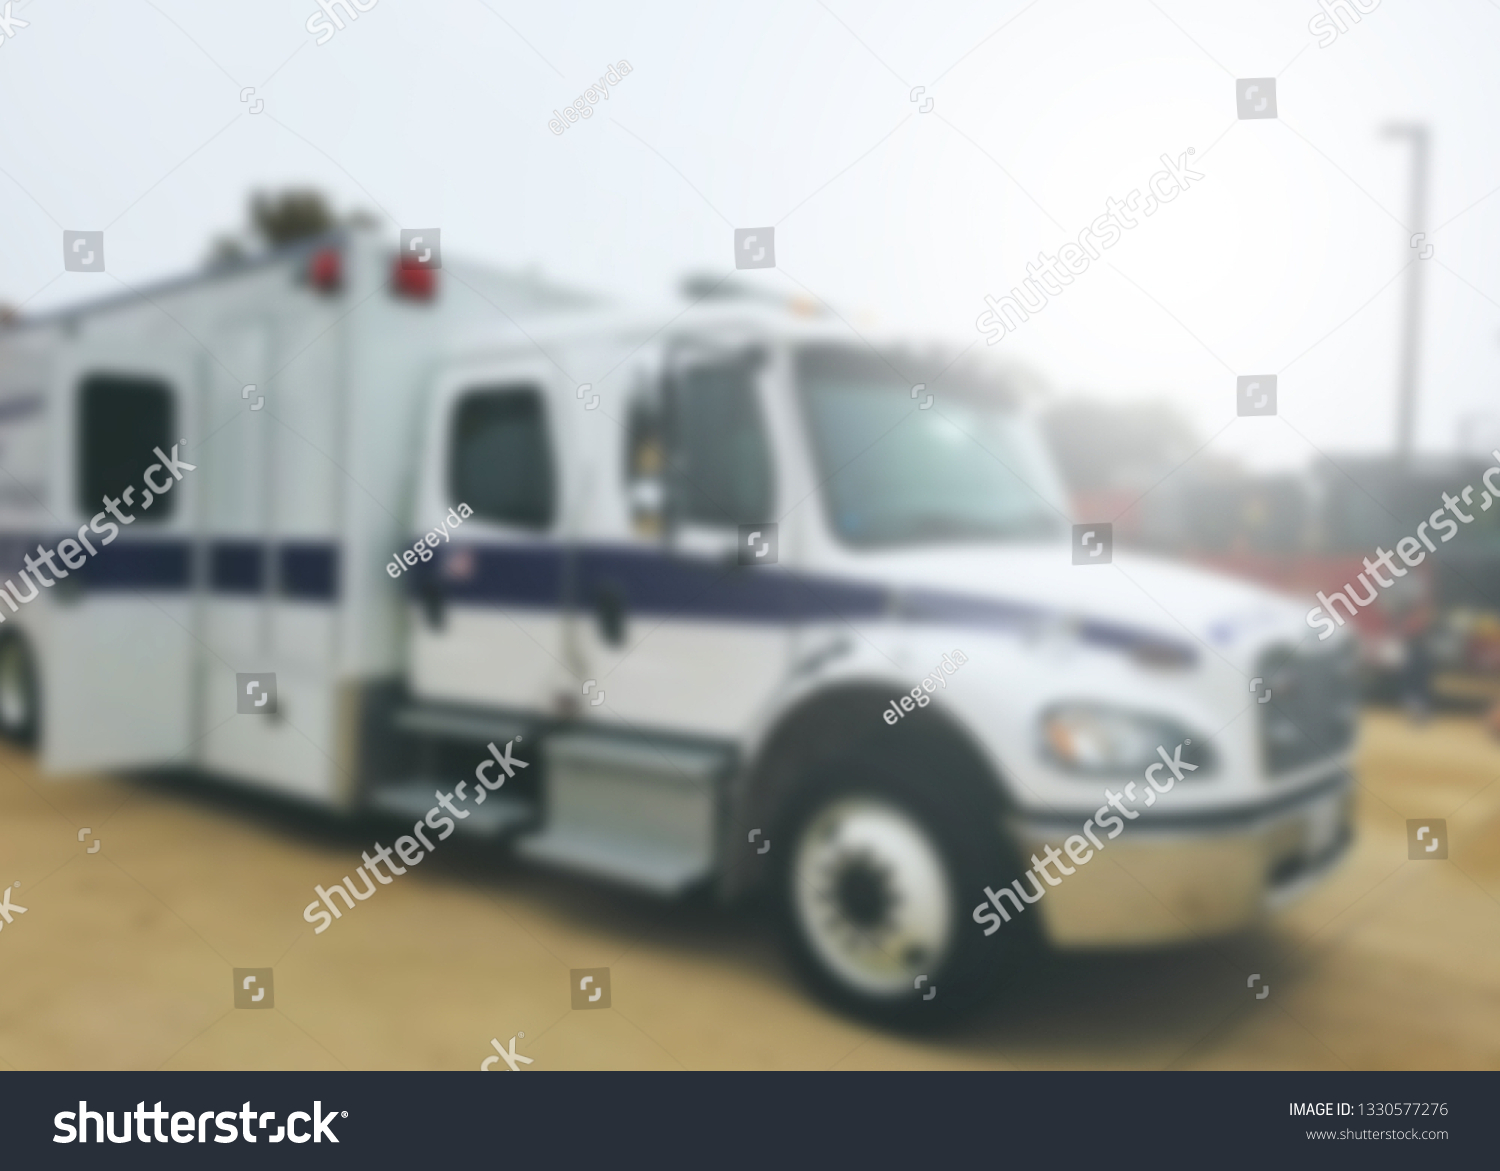 Abstract fire truck background. #1330577276